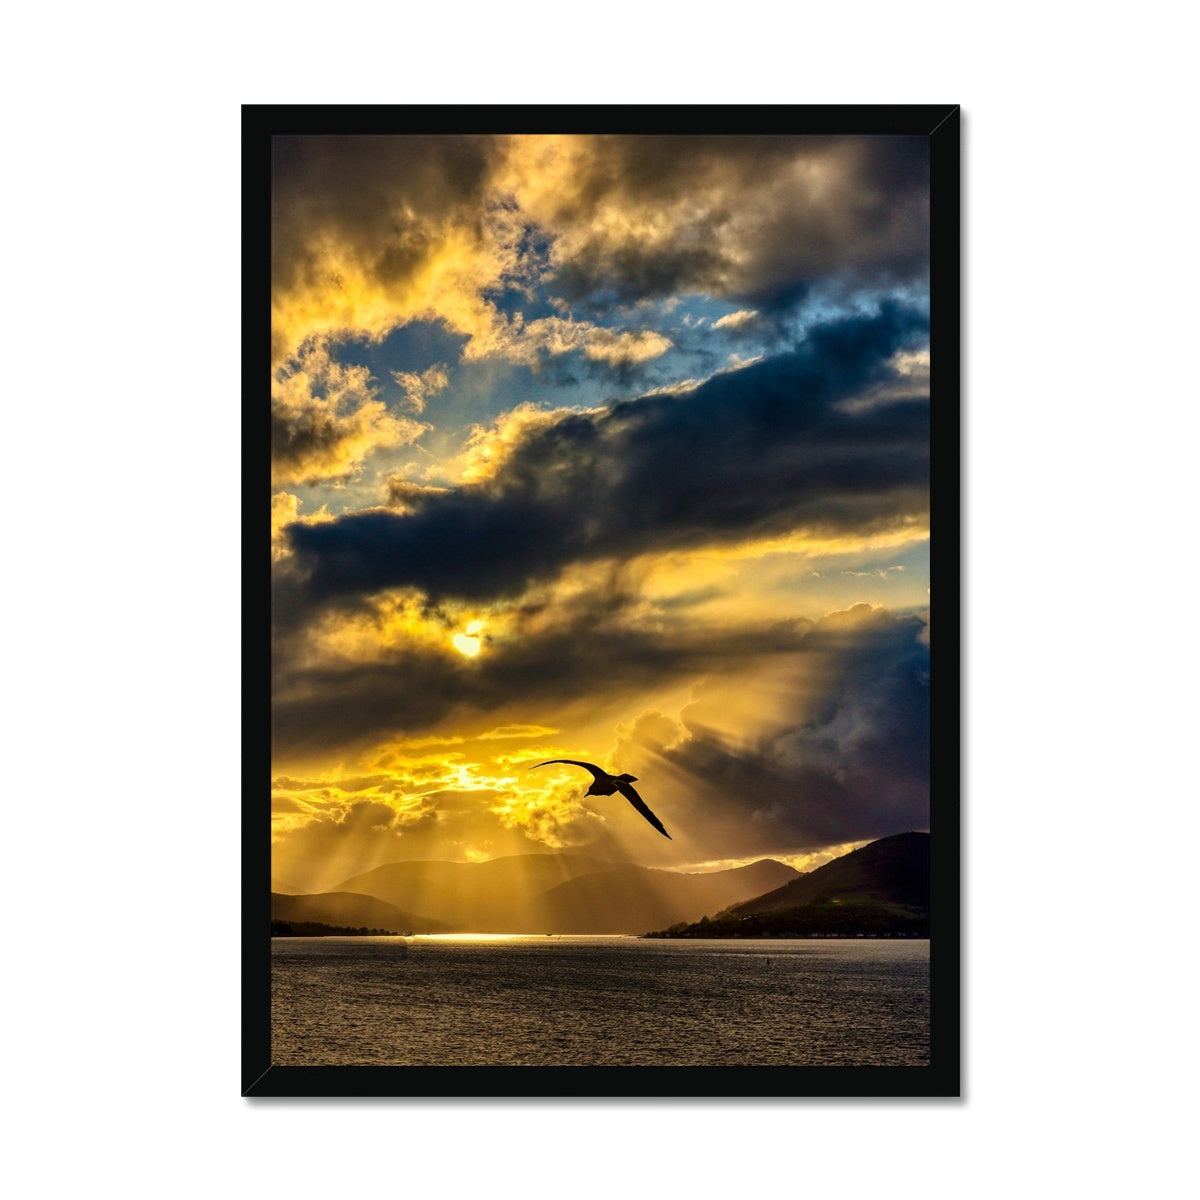 Seagull Soars During A River Clyde Sunset | Scottish Landscape Photography | Framed Print